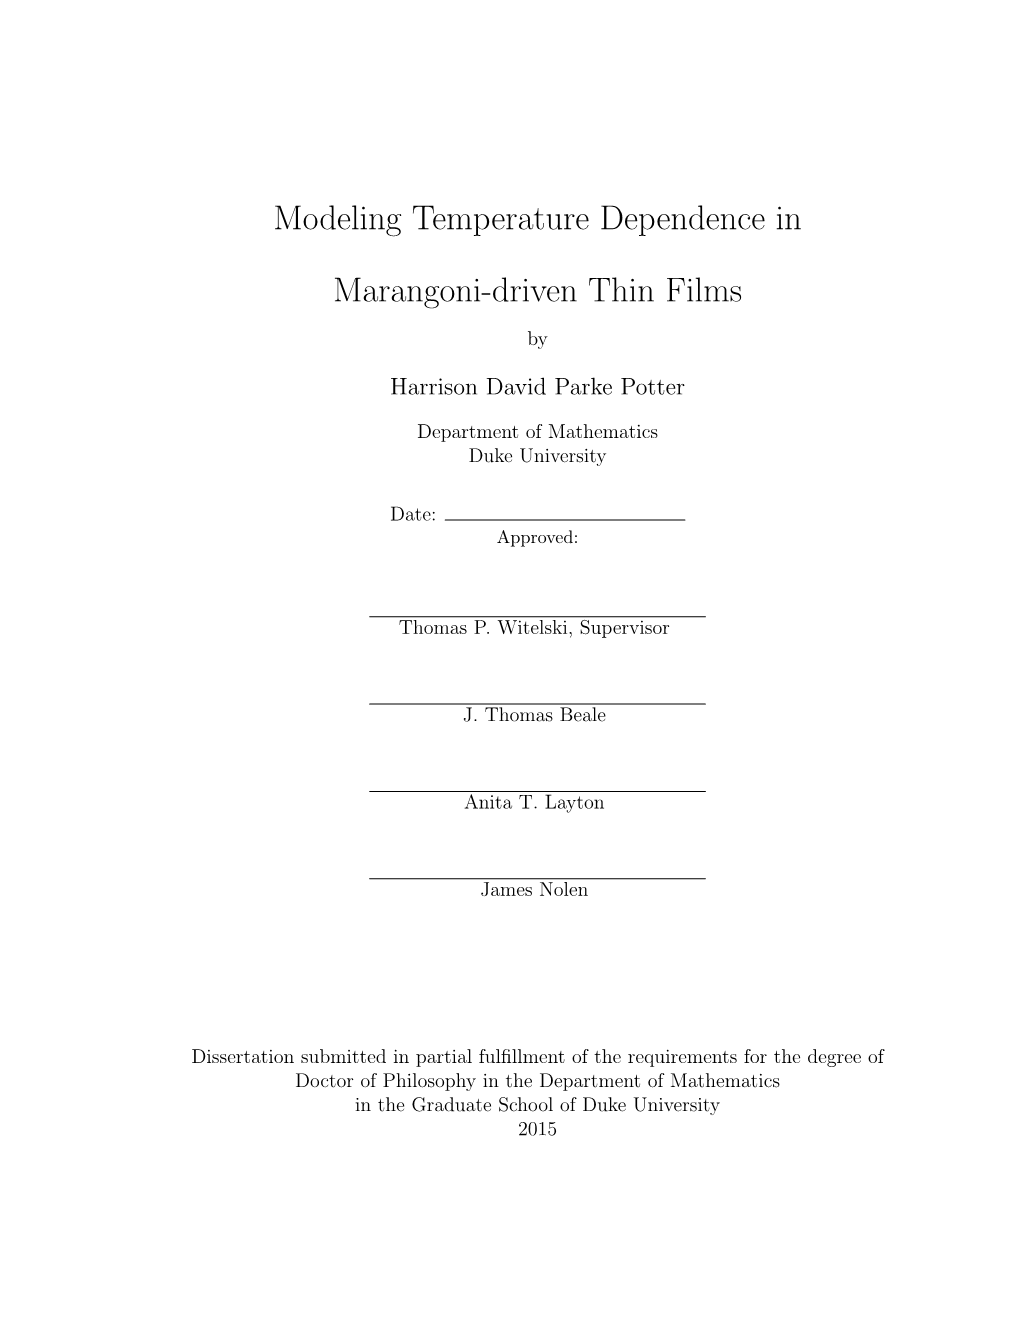 Modeling Temperature Dependence in Marangoni-Driven Thin Films